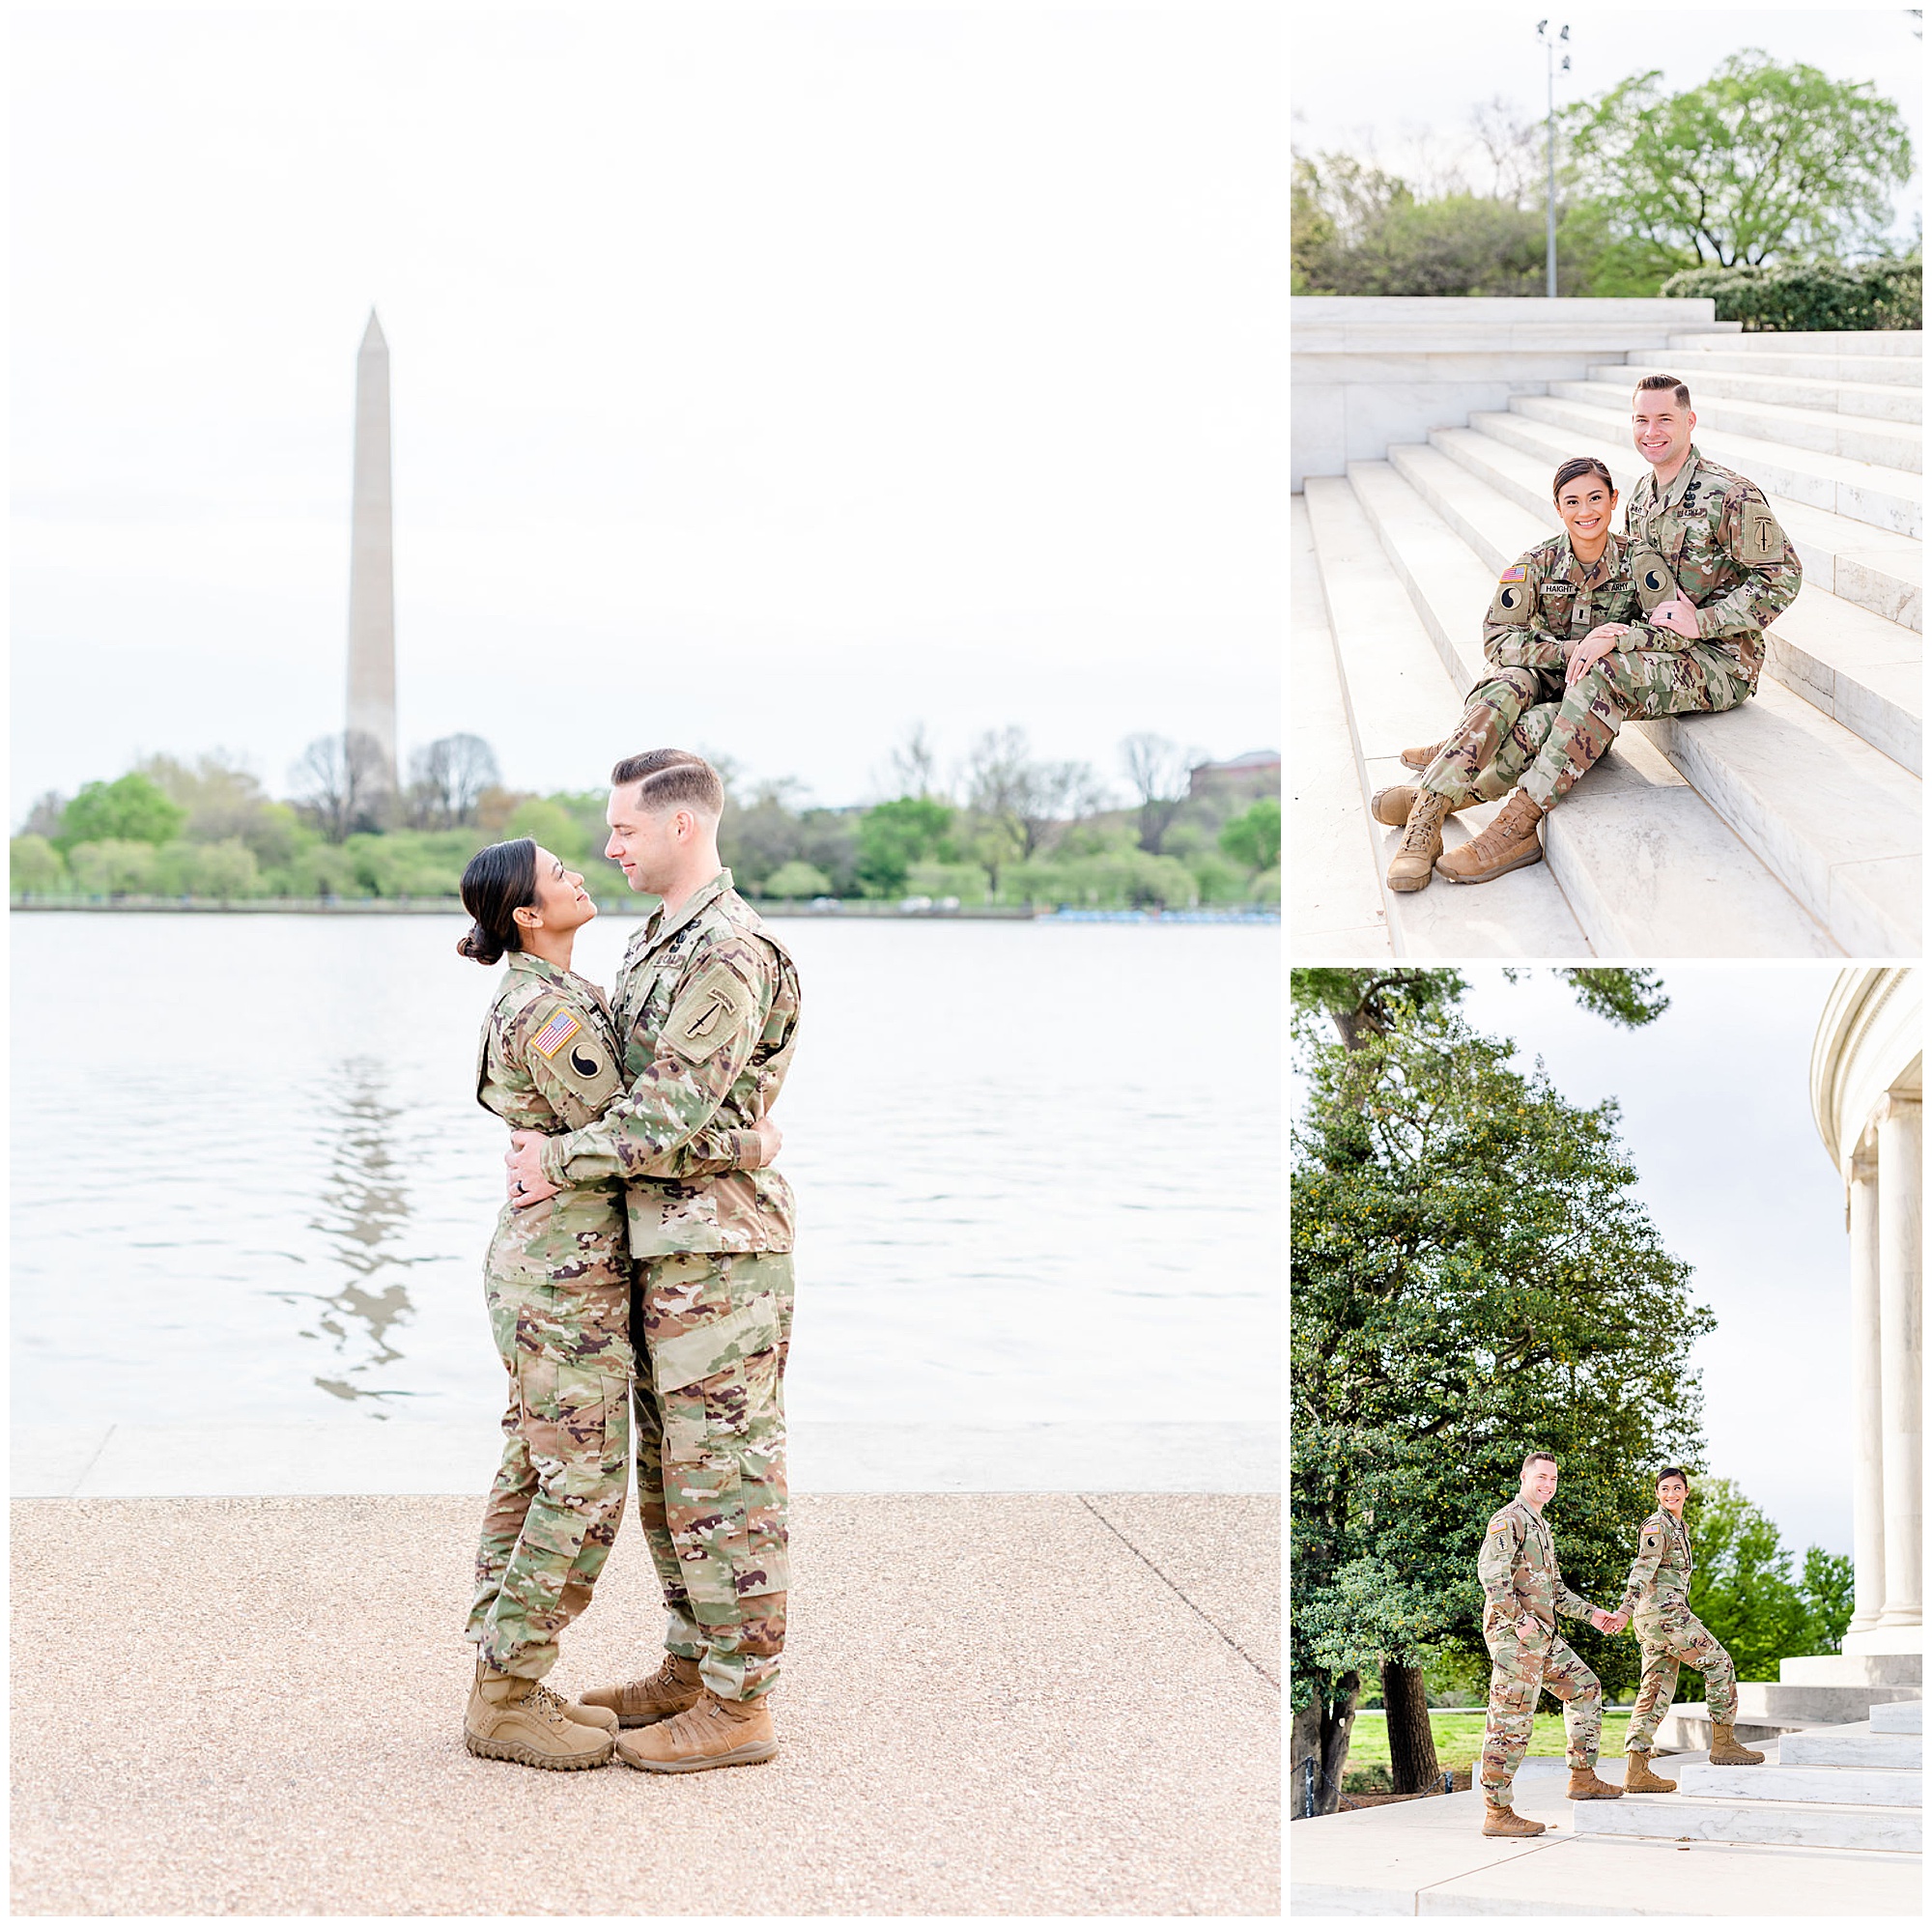 kwanzan cherry blossom portraits, Army couple, D.C. cherry blossom portraits, love birds, romantic portraits, couple goals, military couple, D.C. cherry blossoms photos, spring portraits, newlywed portraits, Rachel E.H. Photography, couple sitting on steps, couple walking up steps, couple with arms around each other